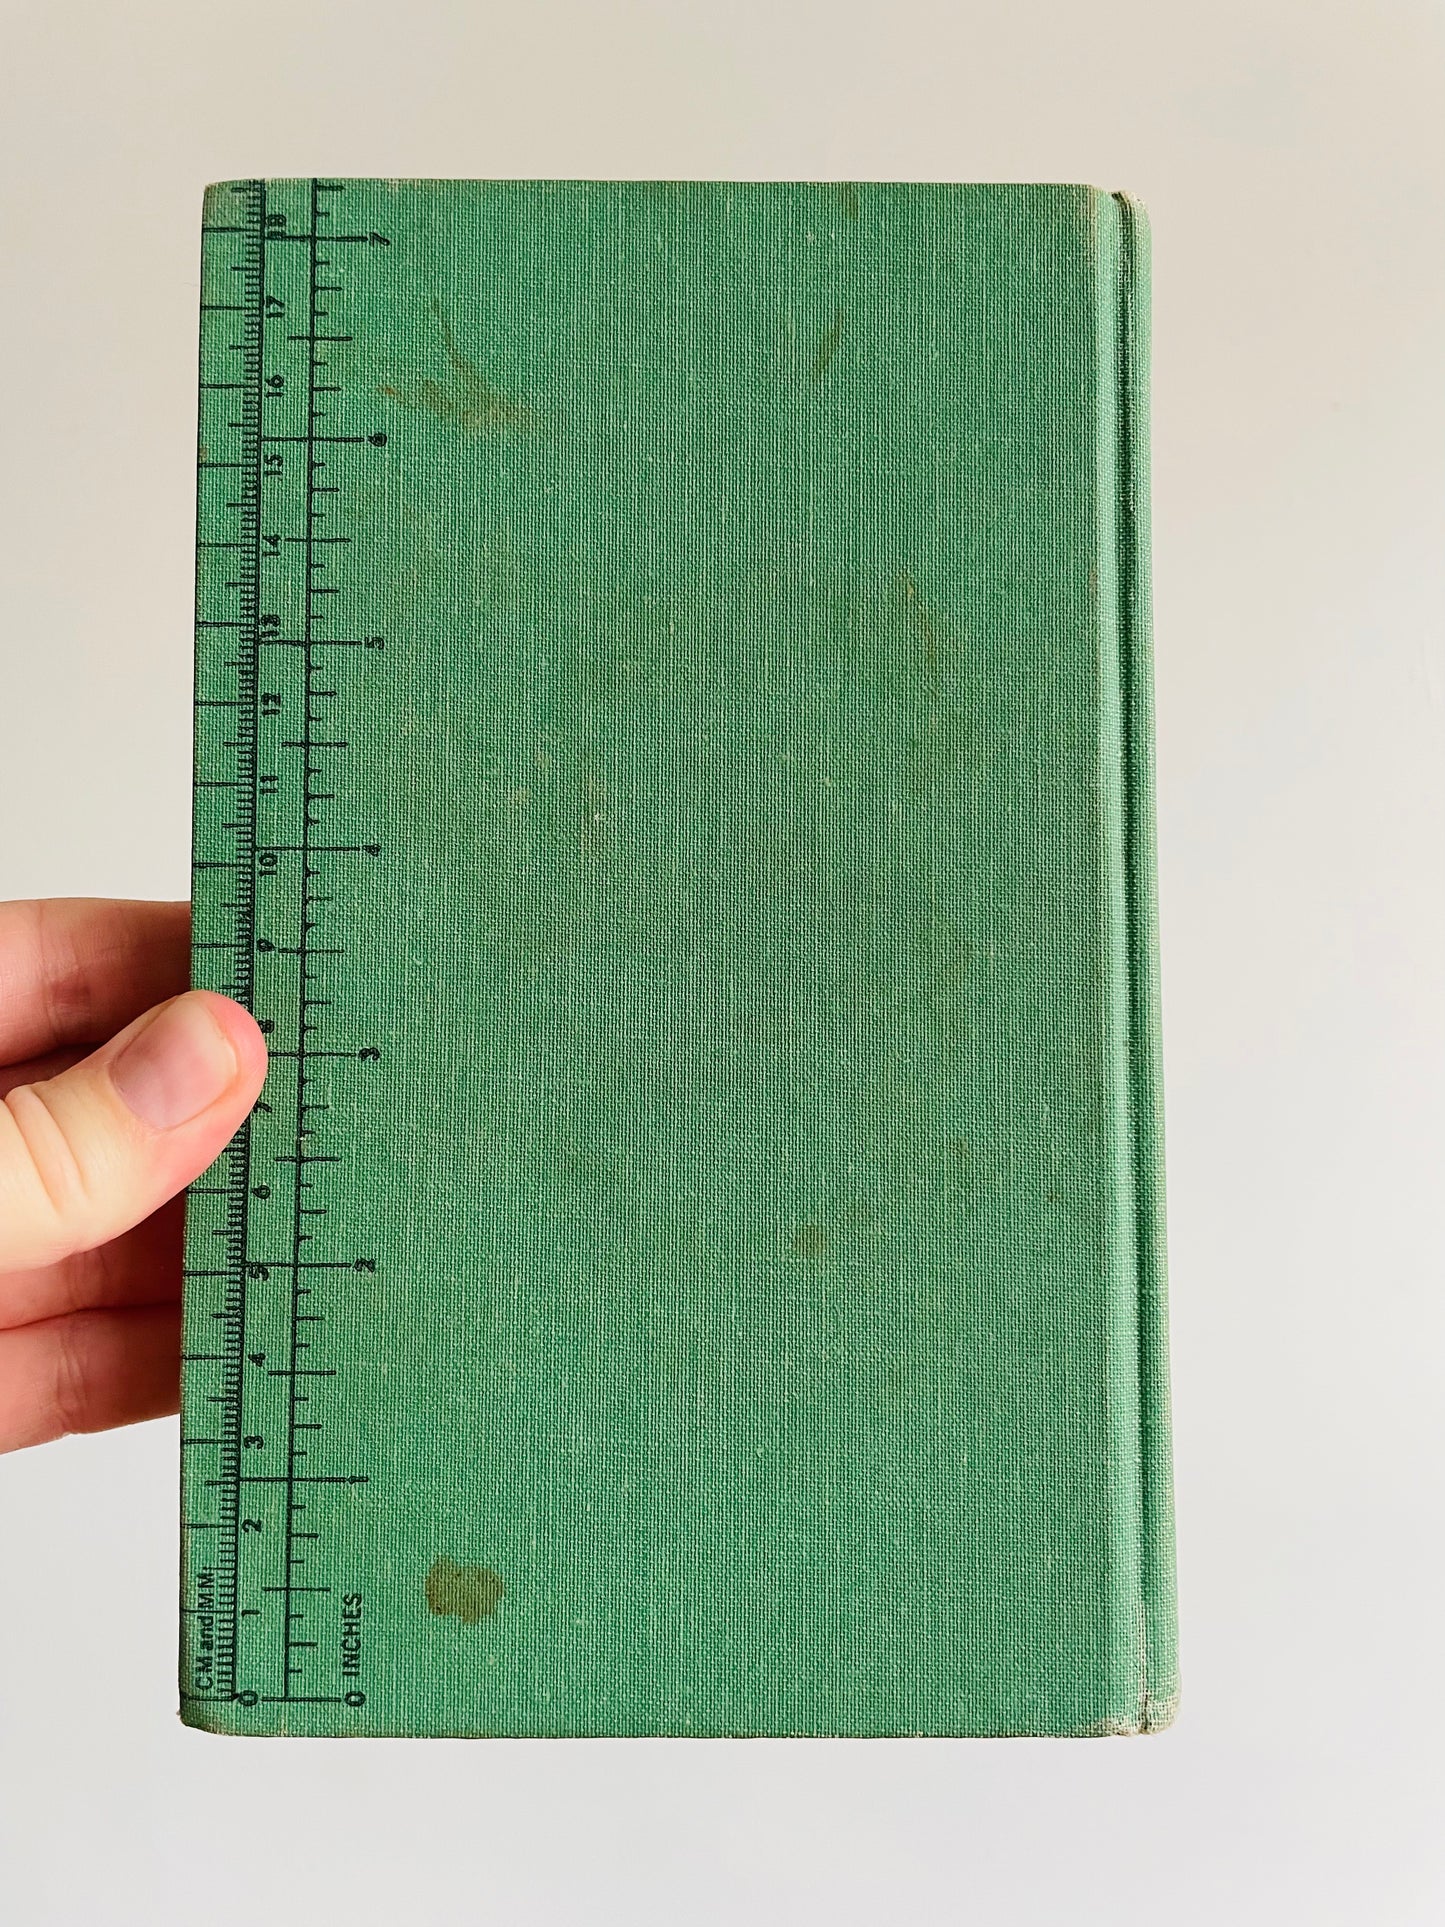 Peterson A Field Guide to the Birds - Teal Clothbound Hardcover Book (1947)